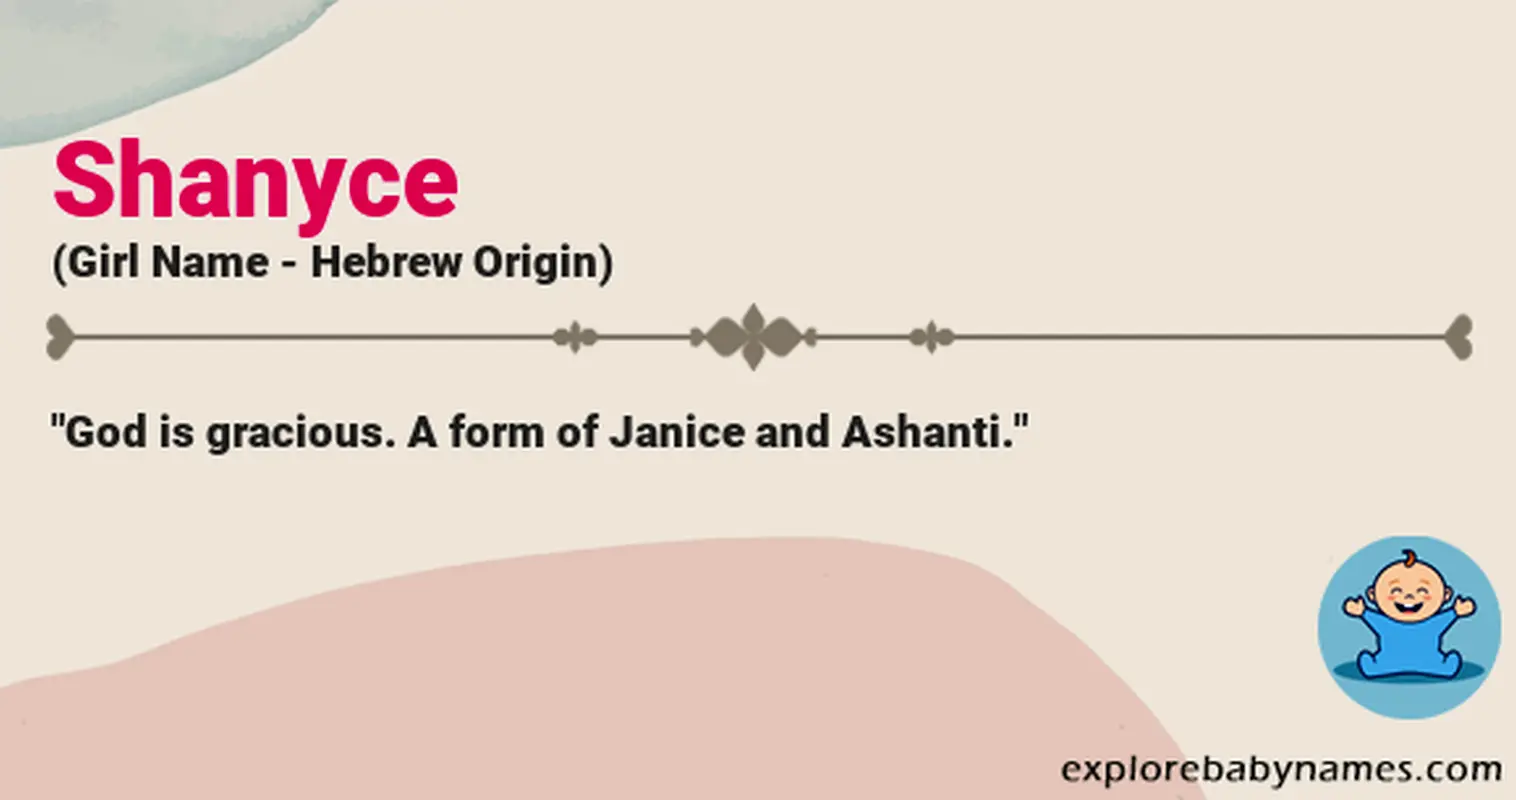 Meaning of Shanyce